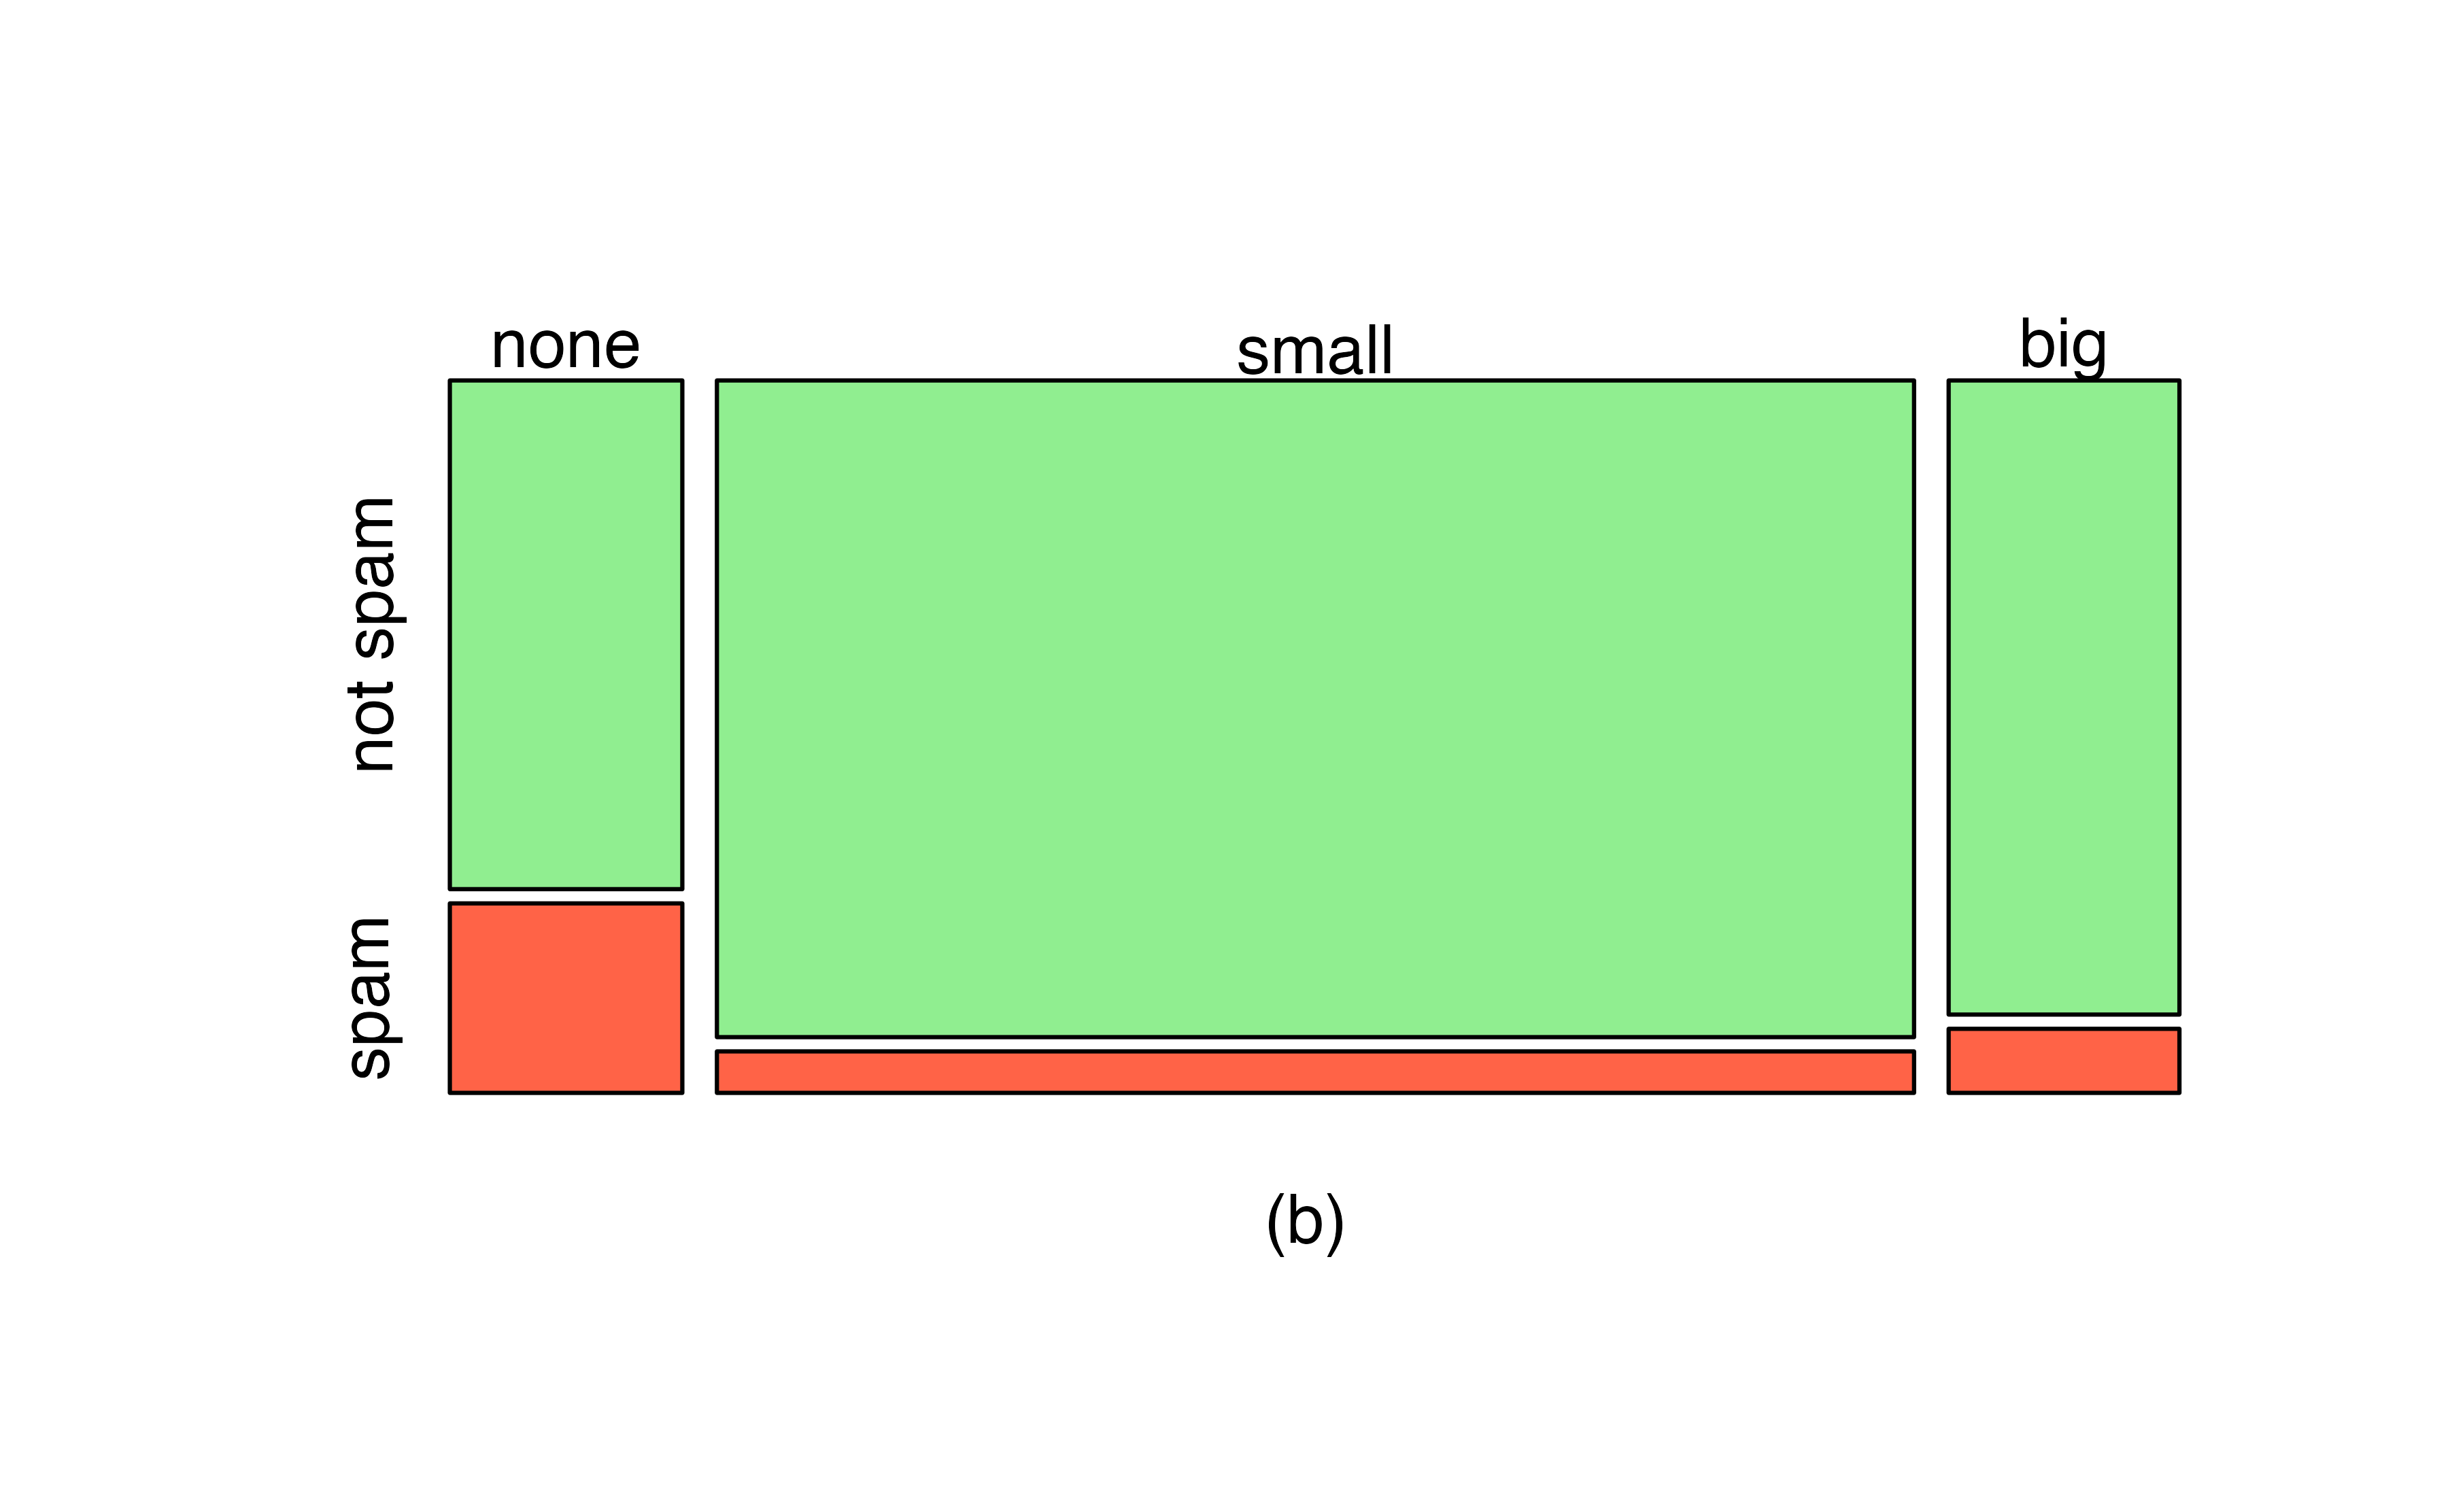 (a) Mosaic plot for numbers found in emails. (b) Mosaic plot where the `number` counts have been further broken down by `type`.